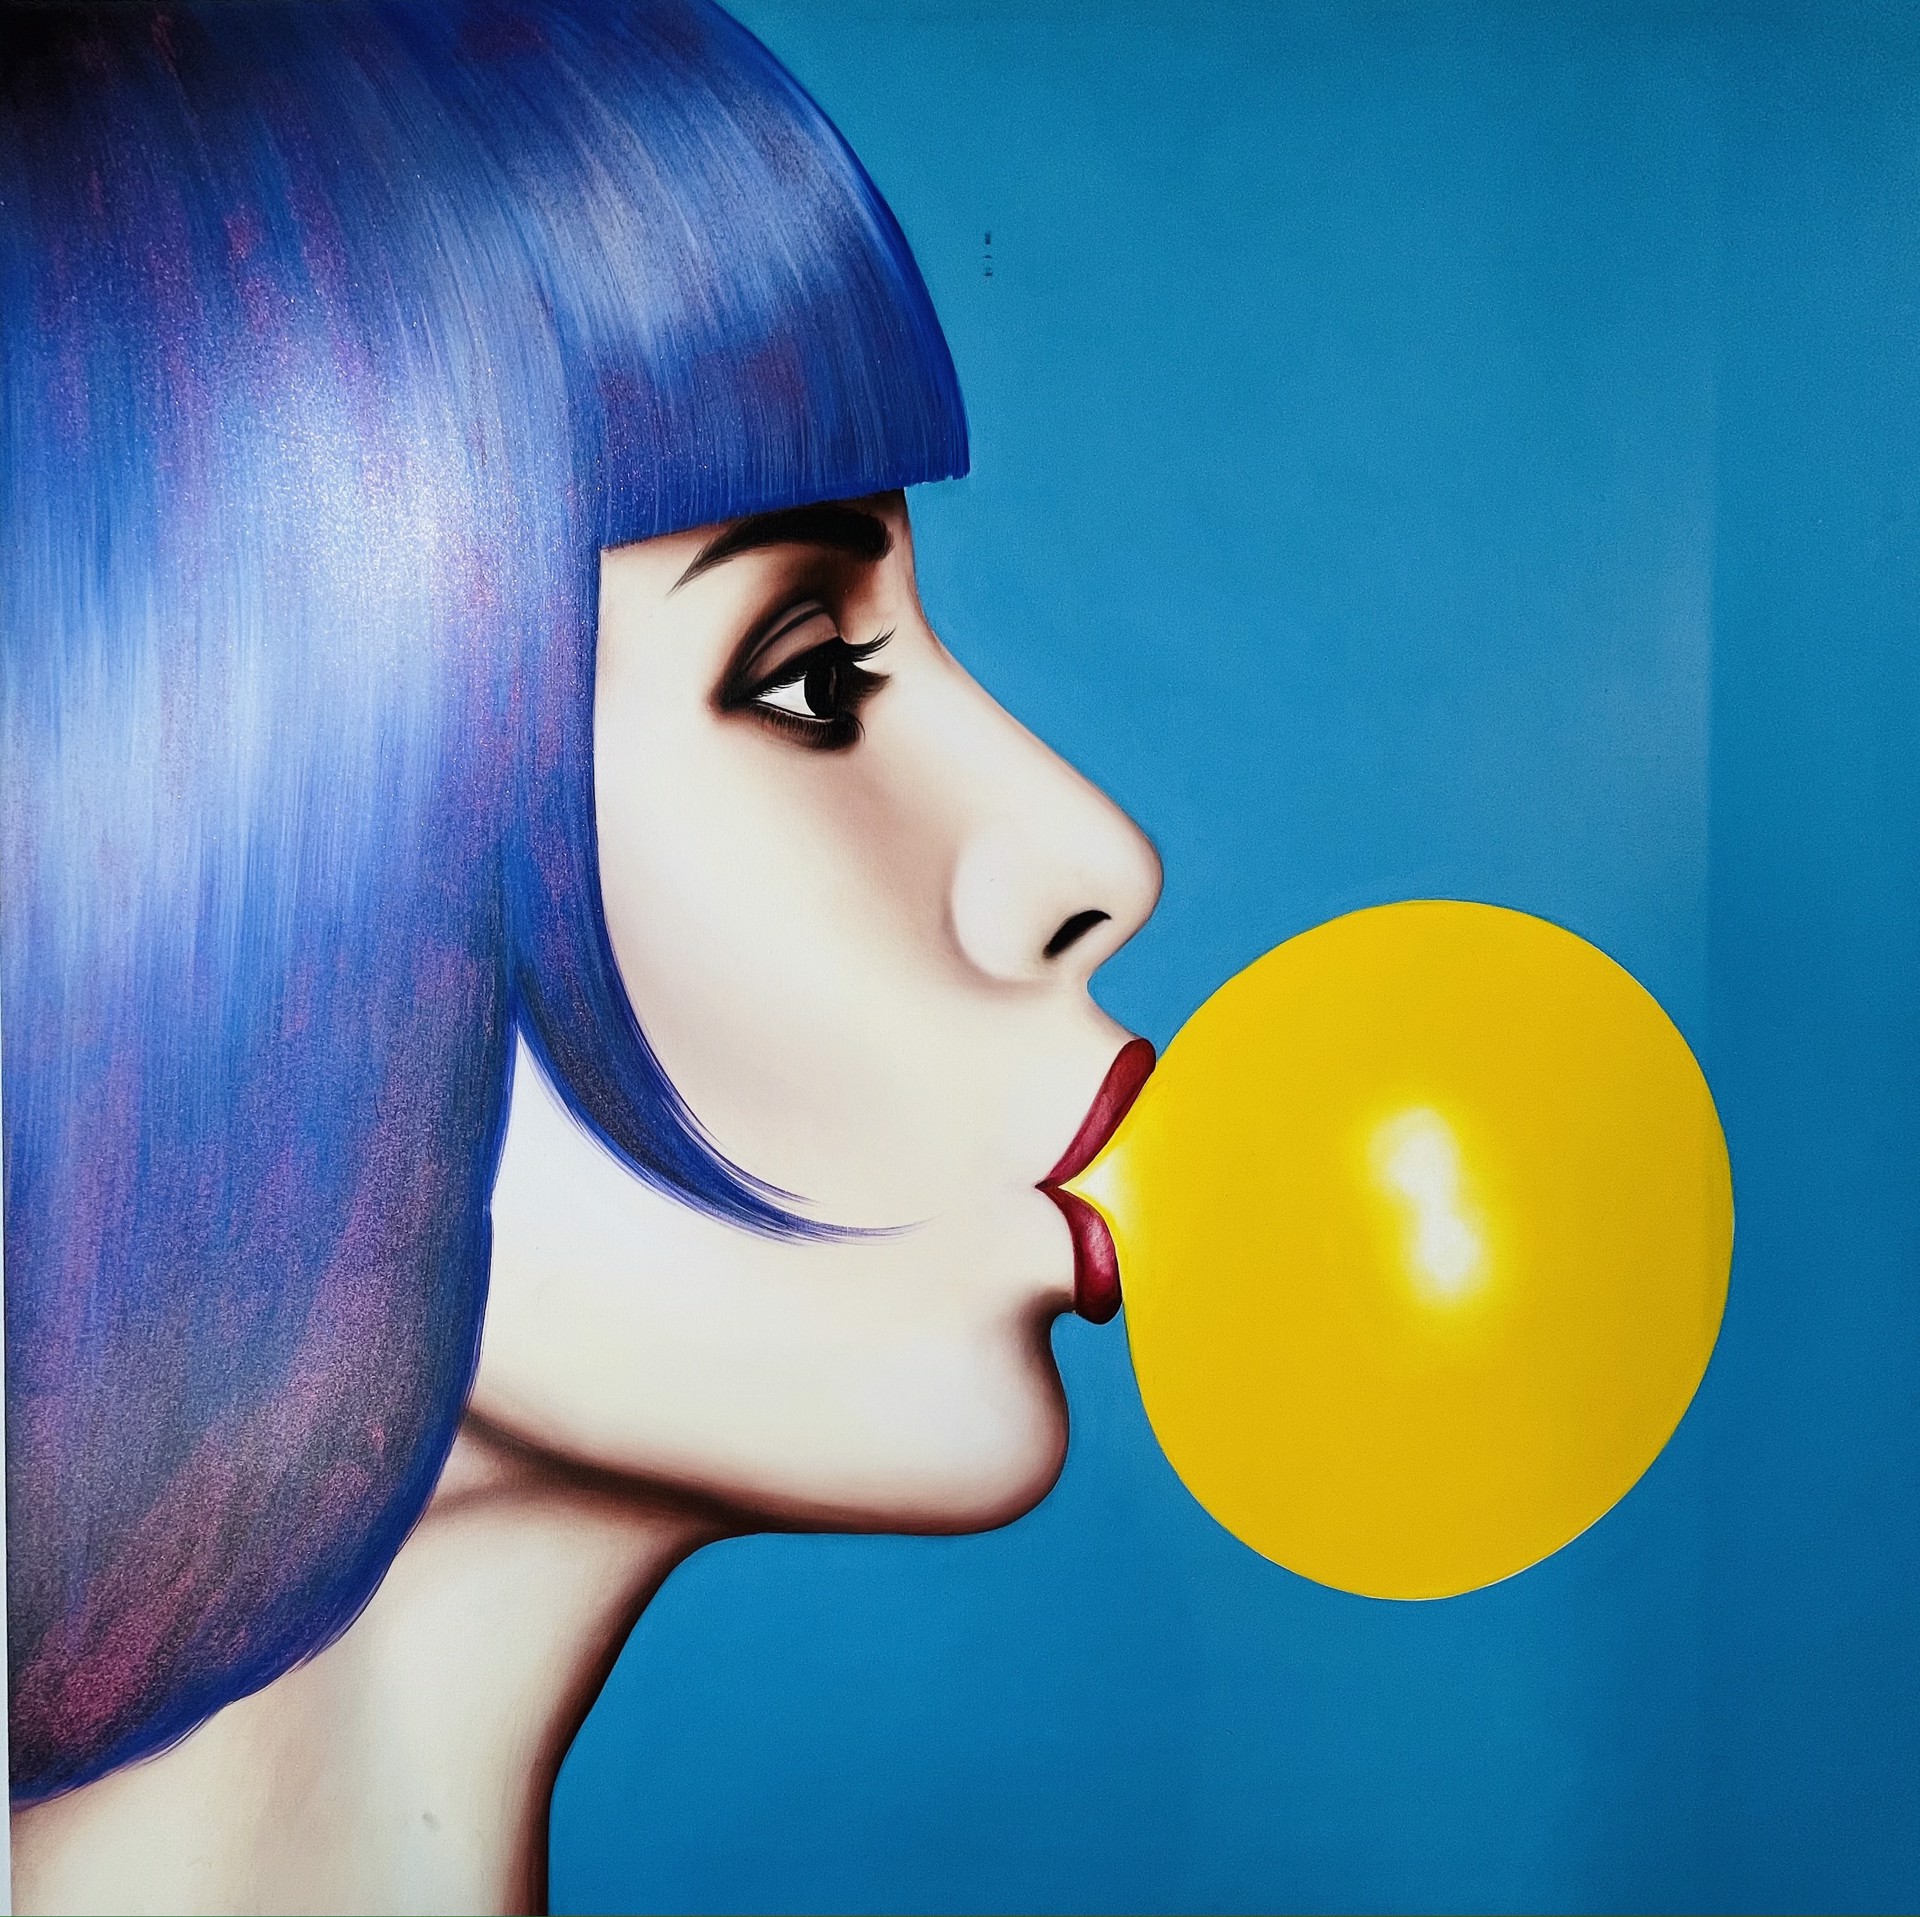 "Blue Hair & Yellow Bubble Gum" by BuMa Project